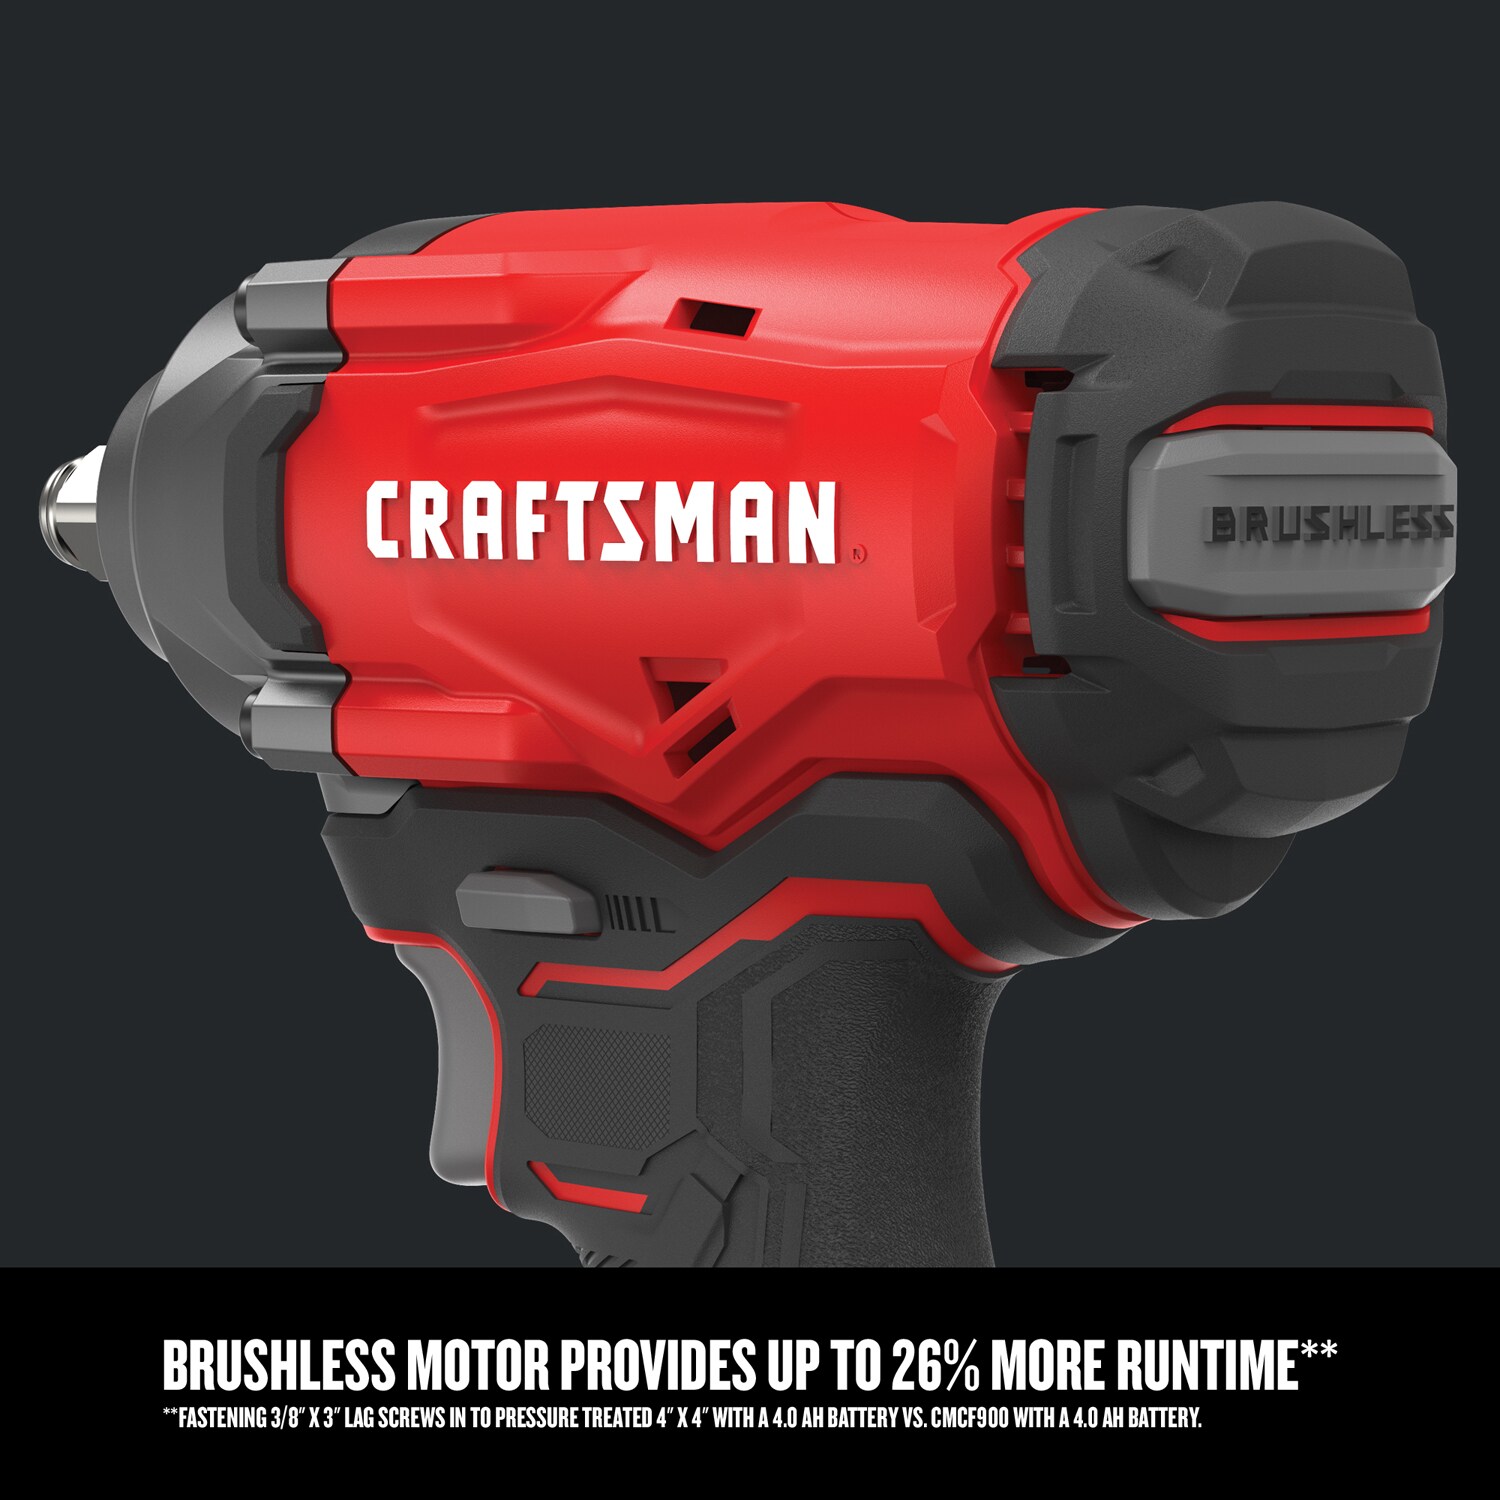 CRAFTSMAN V20 20-volt Max Variable Speed Brushless 1/2-in Drive Cordless Impact Wrench (Tool Only)